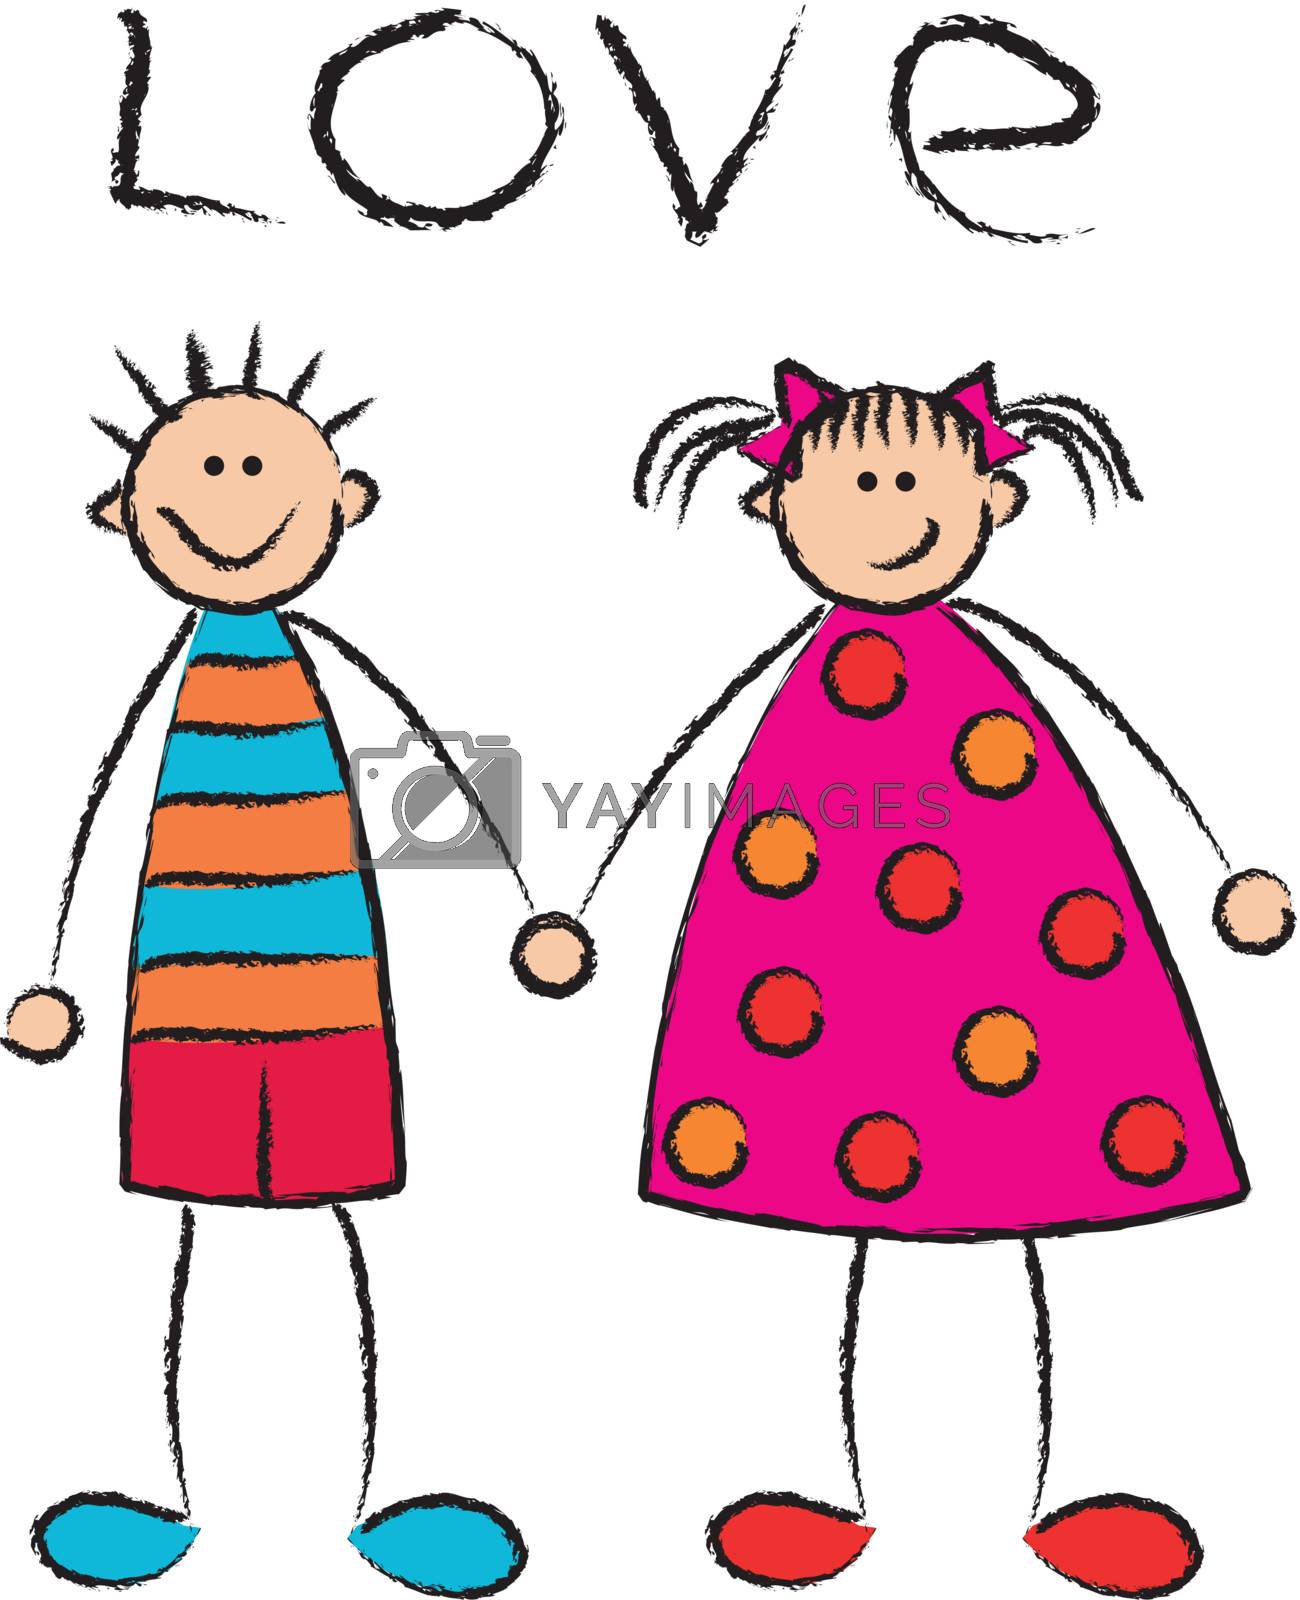 Royalty free image of boy and girl in love (vector) by fat_fa_tin